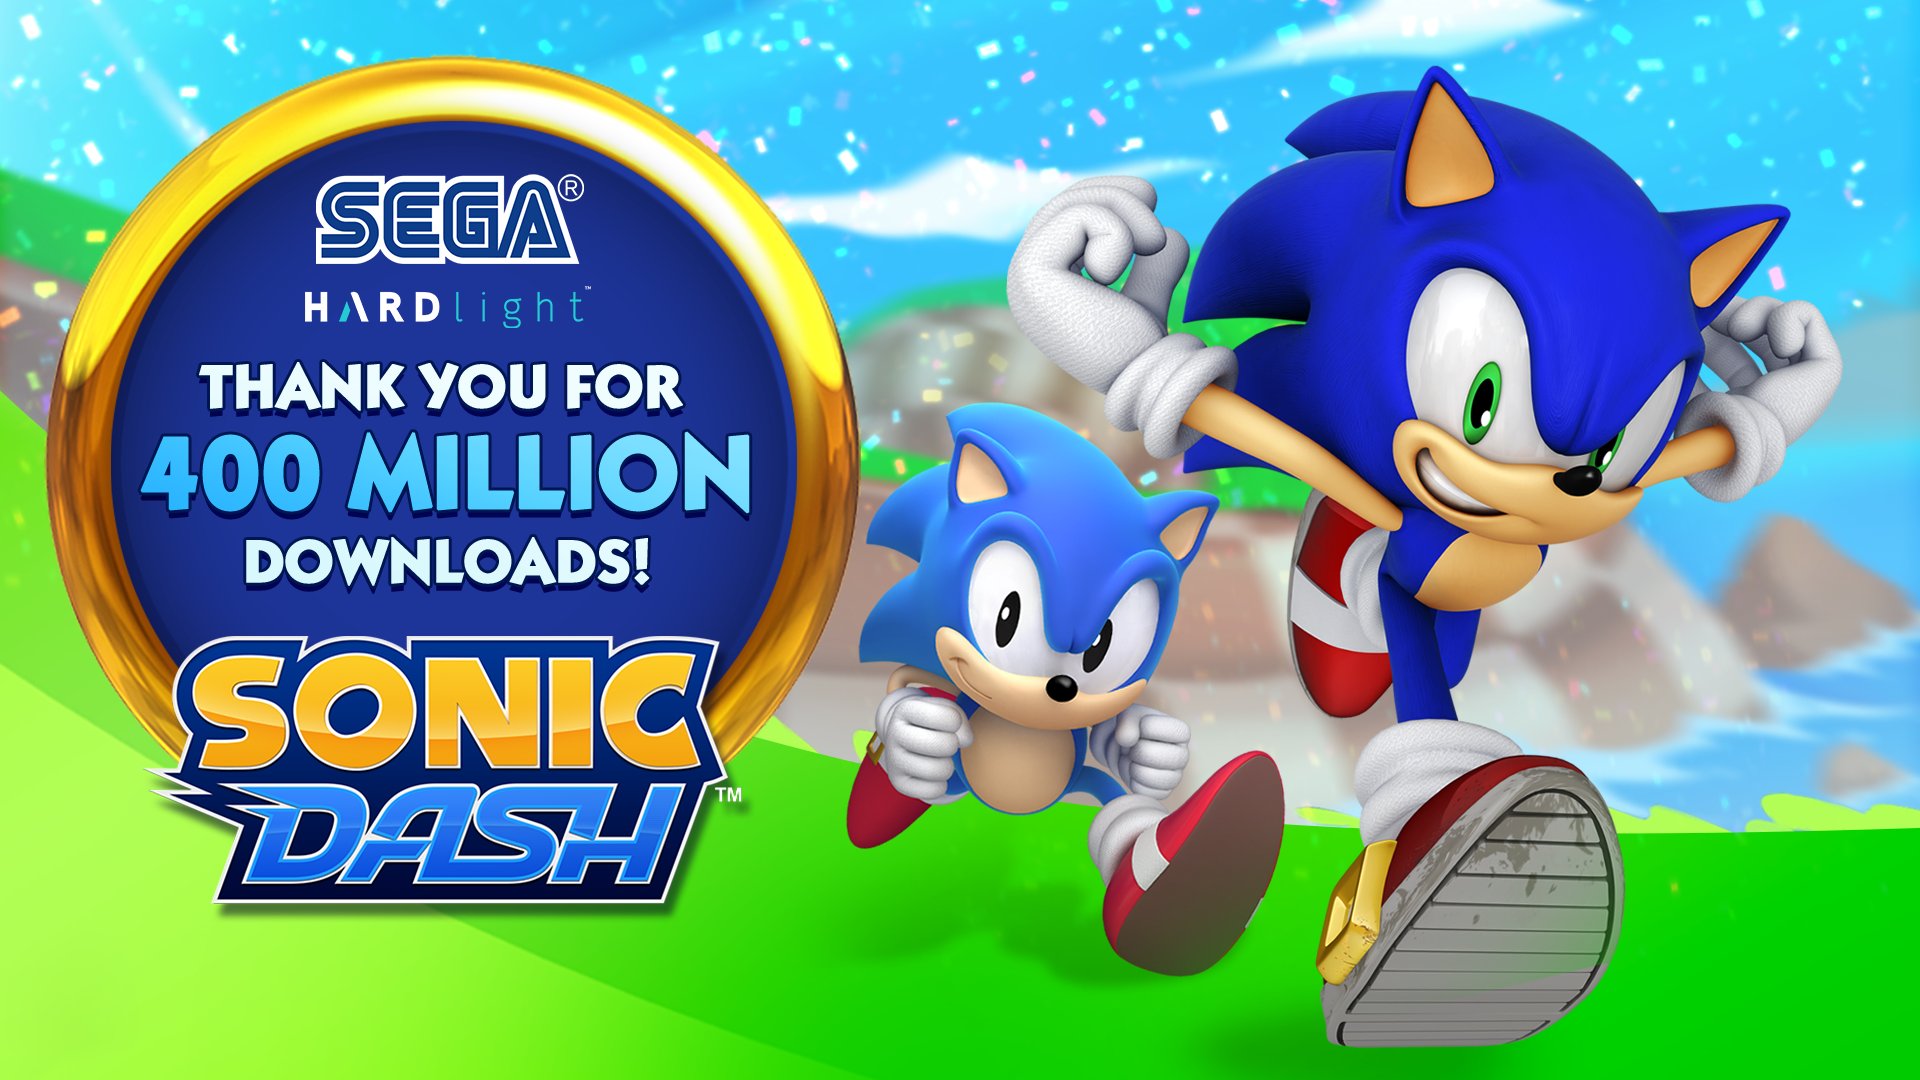 SEGA HARDlight on X: Kicking off Sonic's birthday month with a